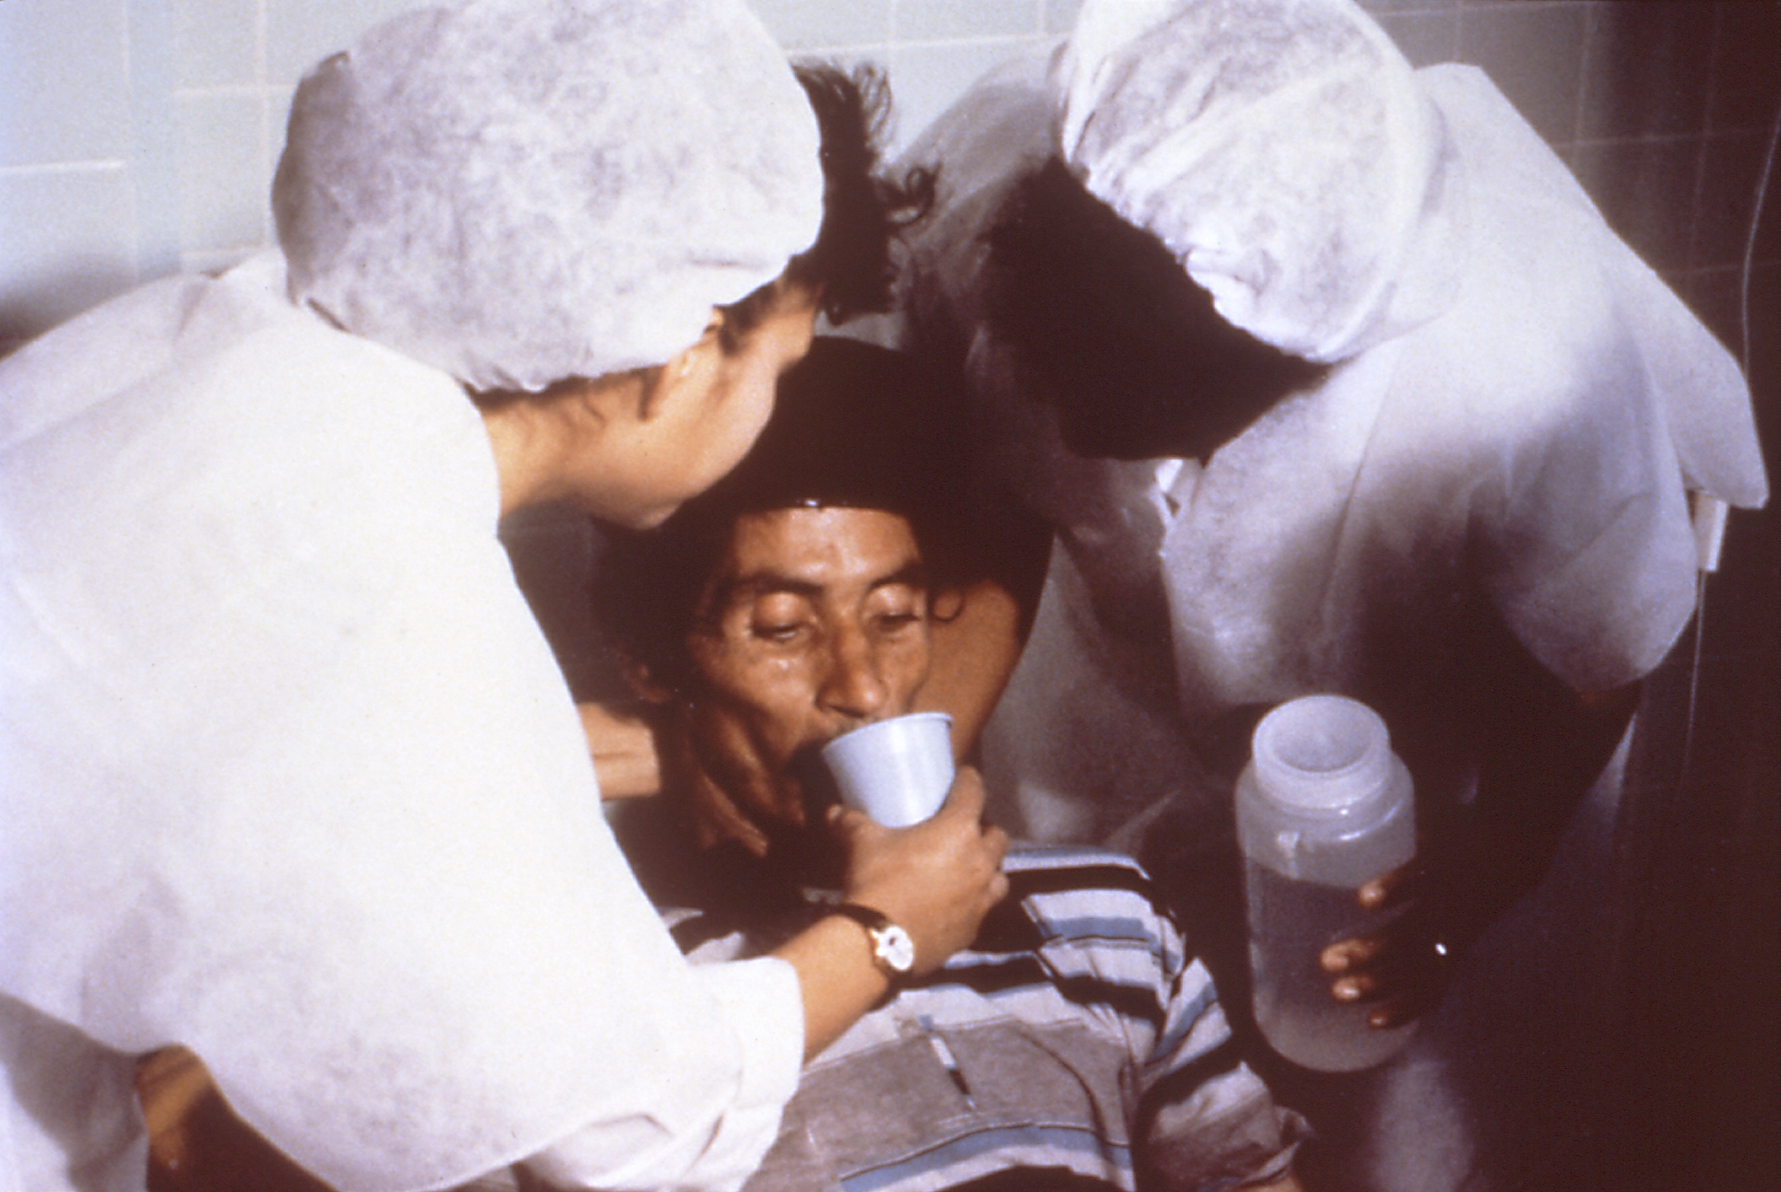 1992 Dr.?? This cholera patient is drinking oral rehydration solution (ORS) in order to counteract his cholera-induced dehydration. The cholera patient should be encouraged to drink the Oral Rehydration Solution (ORS). Even patients who are vomiting can often be treated orally if they take small frequent sips. Their vomiting will subside when their acidosis is corrected.